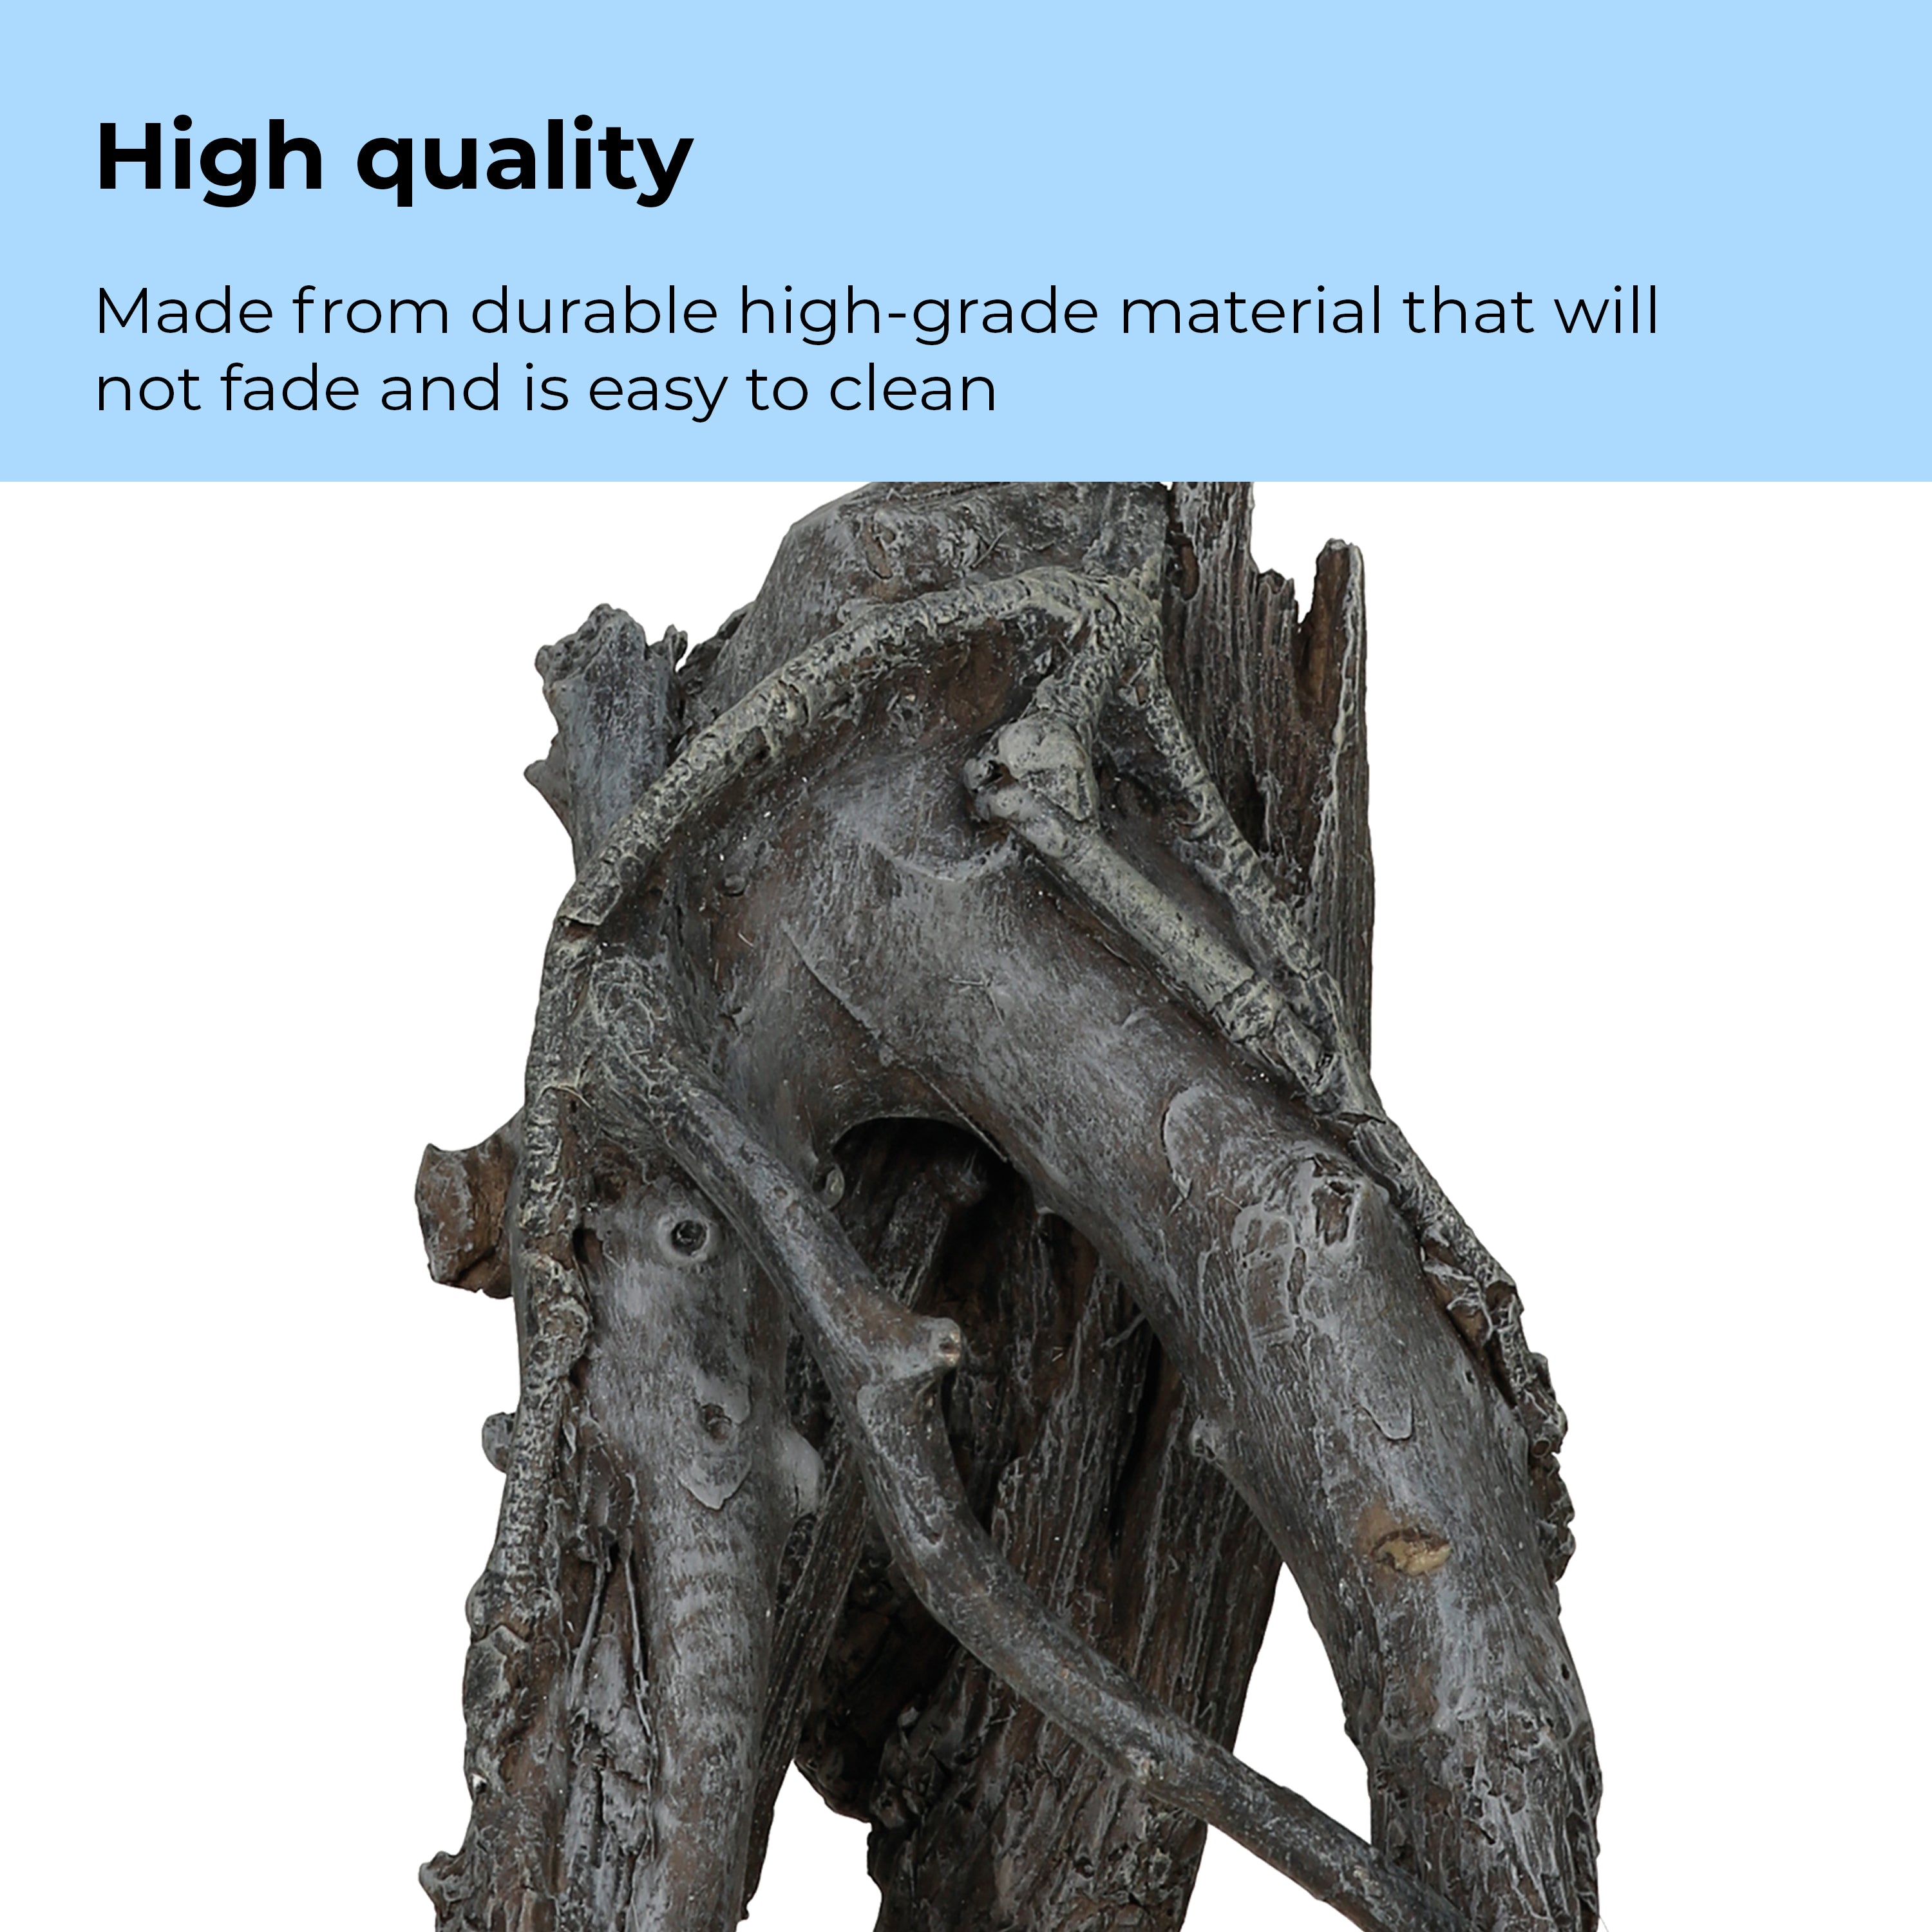 Medium Amazonas Root Sculpture made from durable high quality material